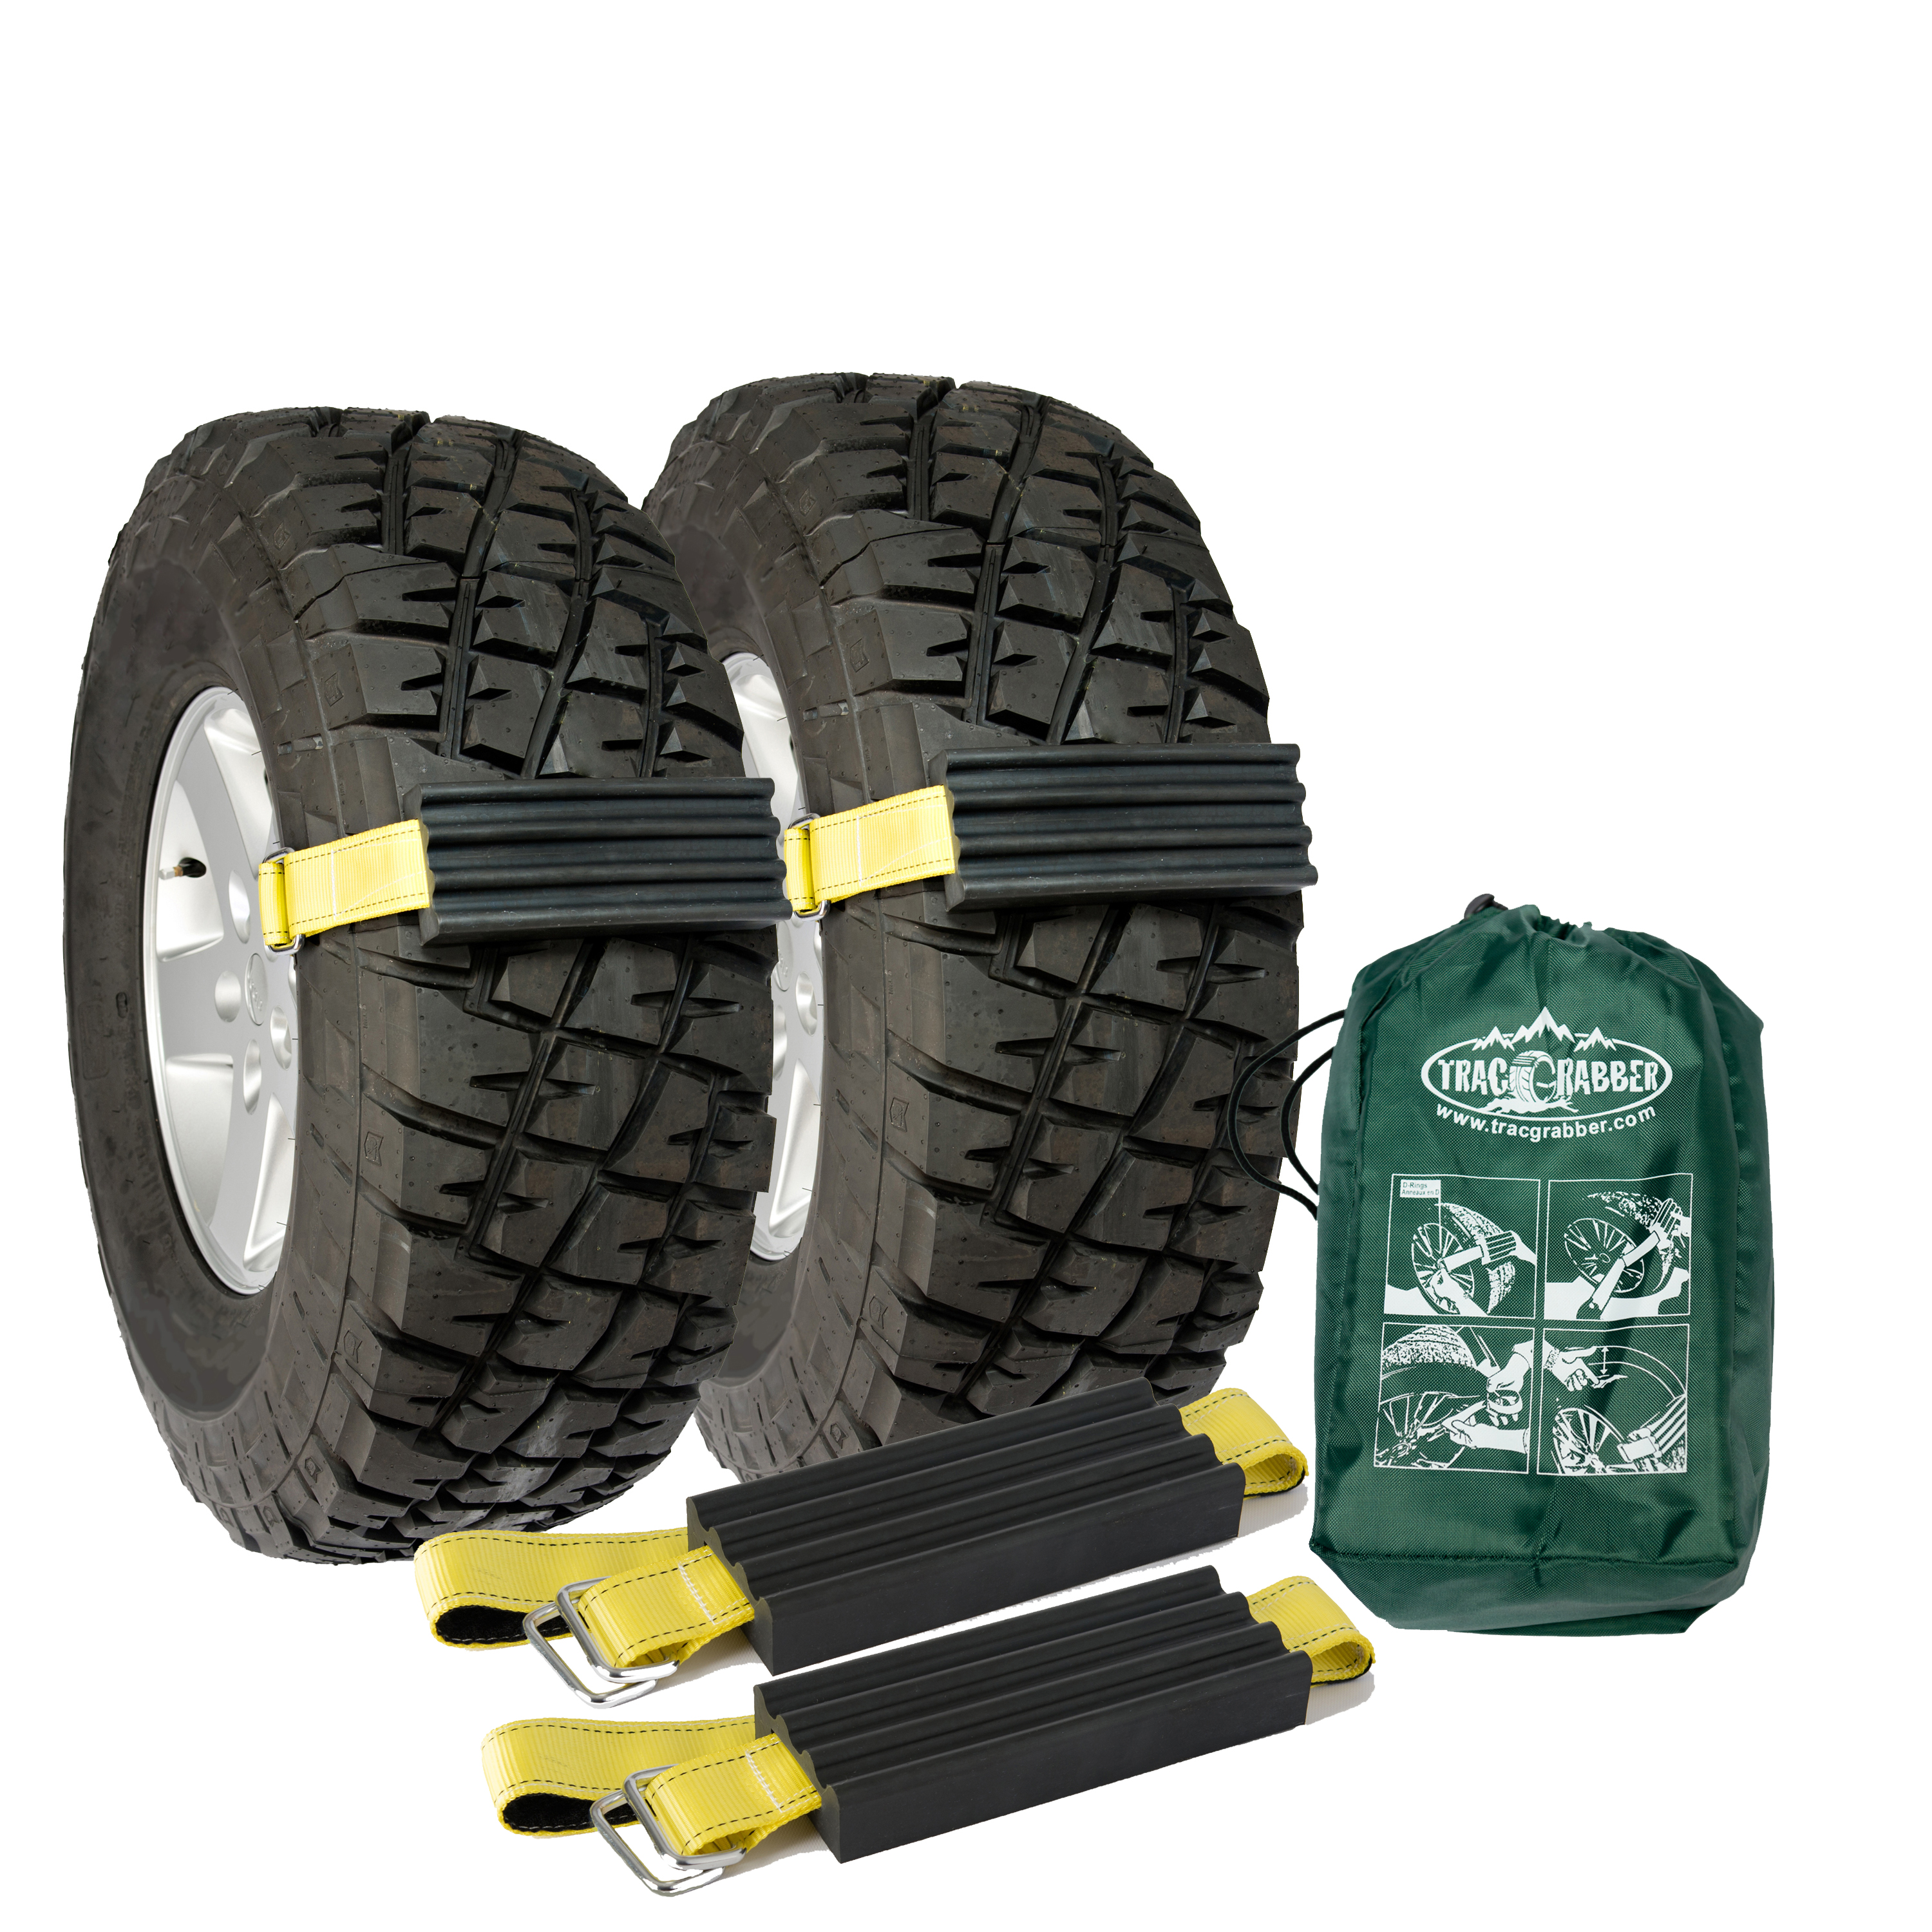 Trac-Grabber Easy Install Blocks Strap To Vehicle Tires A Chain / Snow Tire Alternative That Helps You Get Unstuck Mud and Sand Tire Traction Device for Oversize Trucks / SUVs Snow Set of 2 